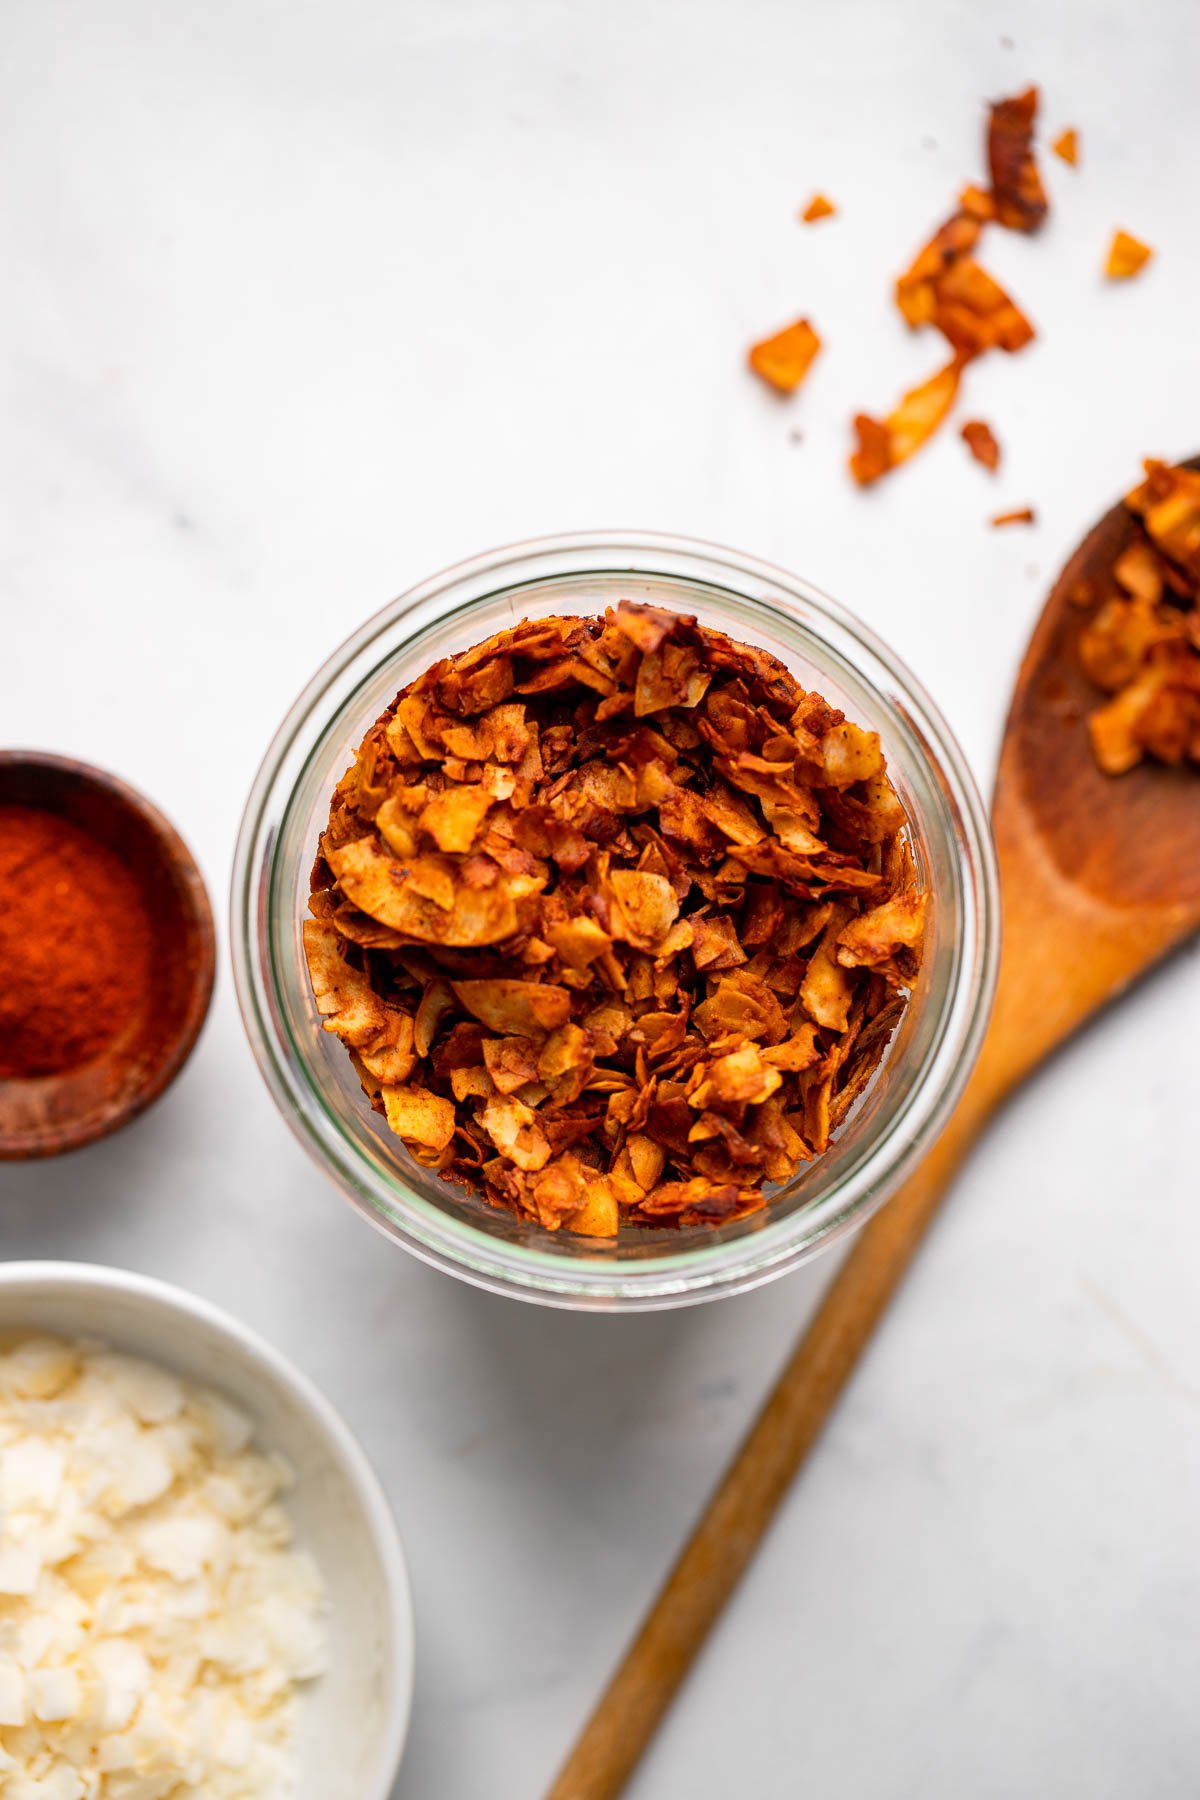 coconut bacon in a jar with a wooden spoon laying next to it.